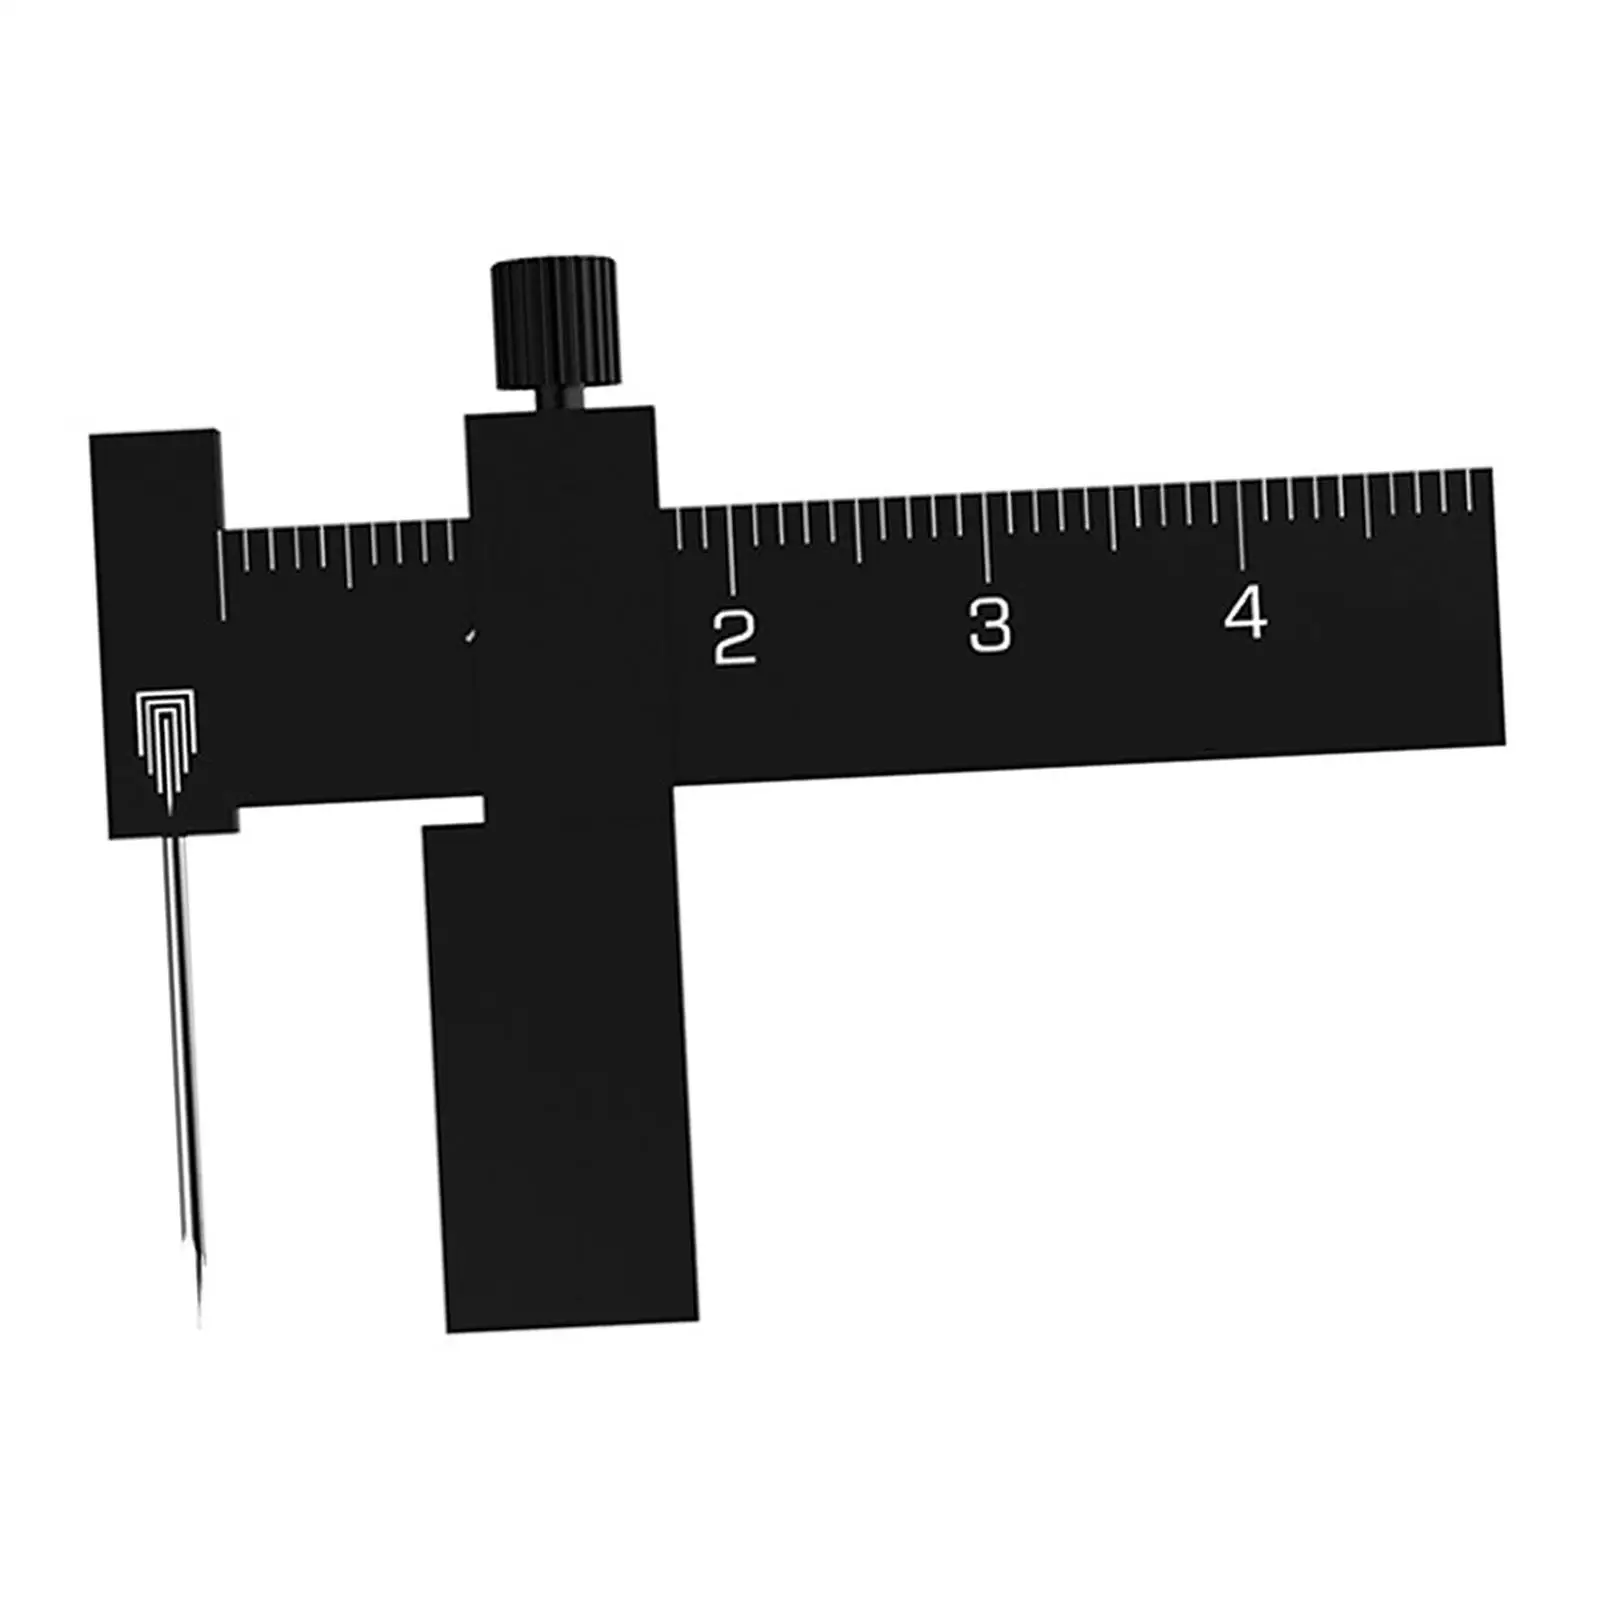 Equidistant Parallel Scriber T14A03 Carving Ruler for Mechanical Engineering Scale Model Modeler Craft Tool Crafting Drafting